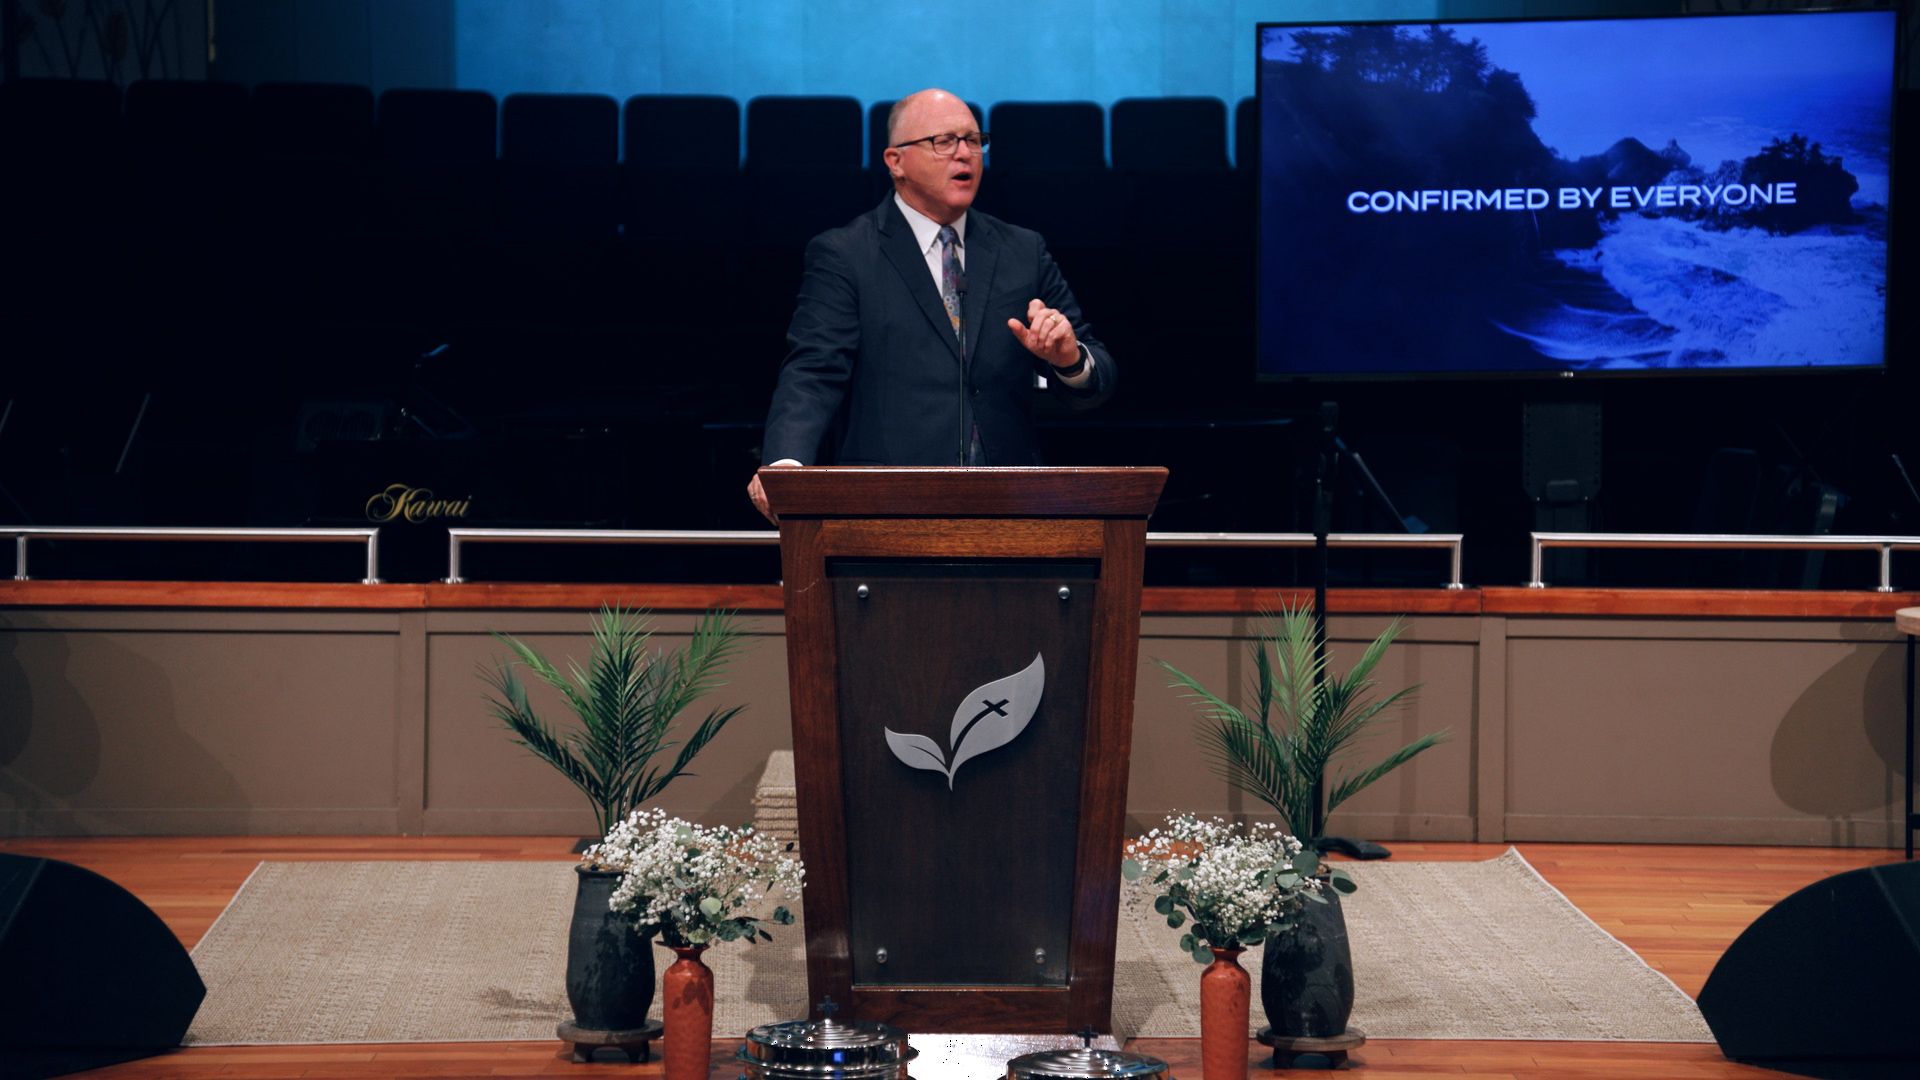 Pastor Paul Chappell: A Good Report